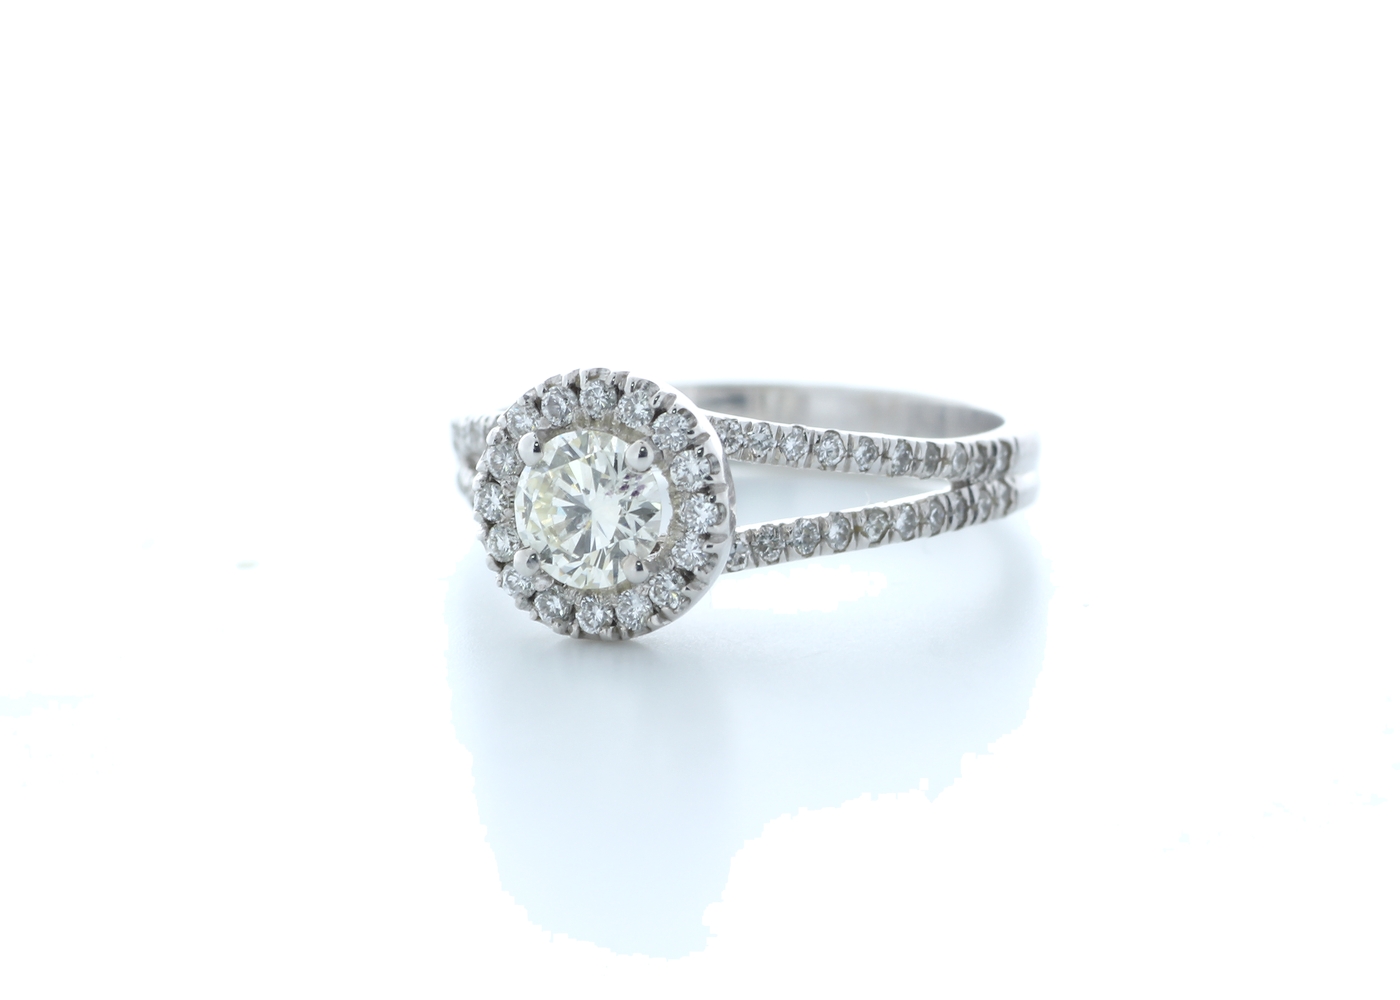 18ct White Gold Single Stone With Halo Setting Ring 0.78 (0.45) Carats - Image 2 of 5